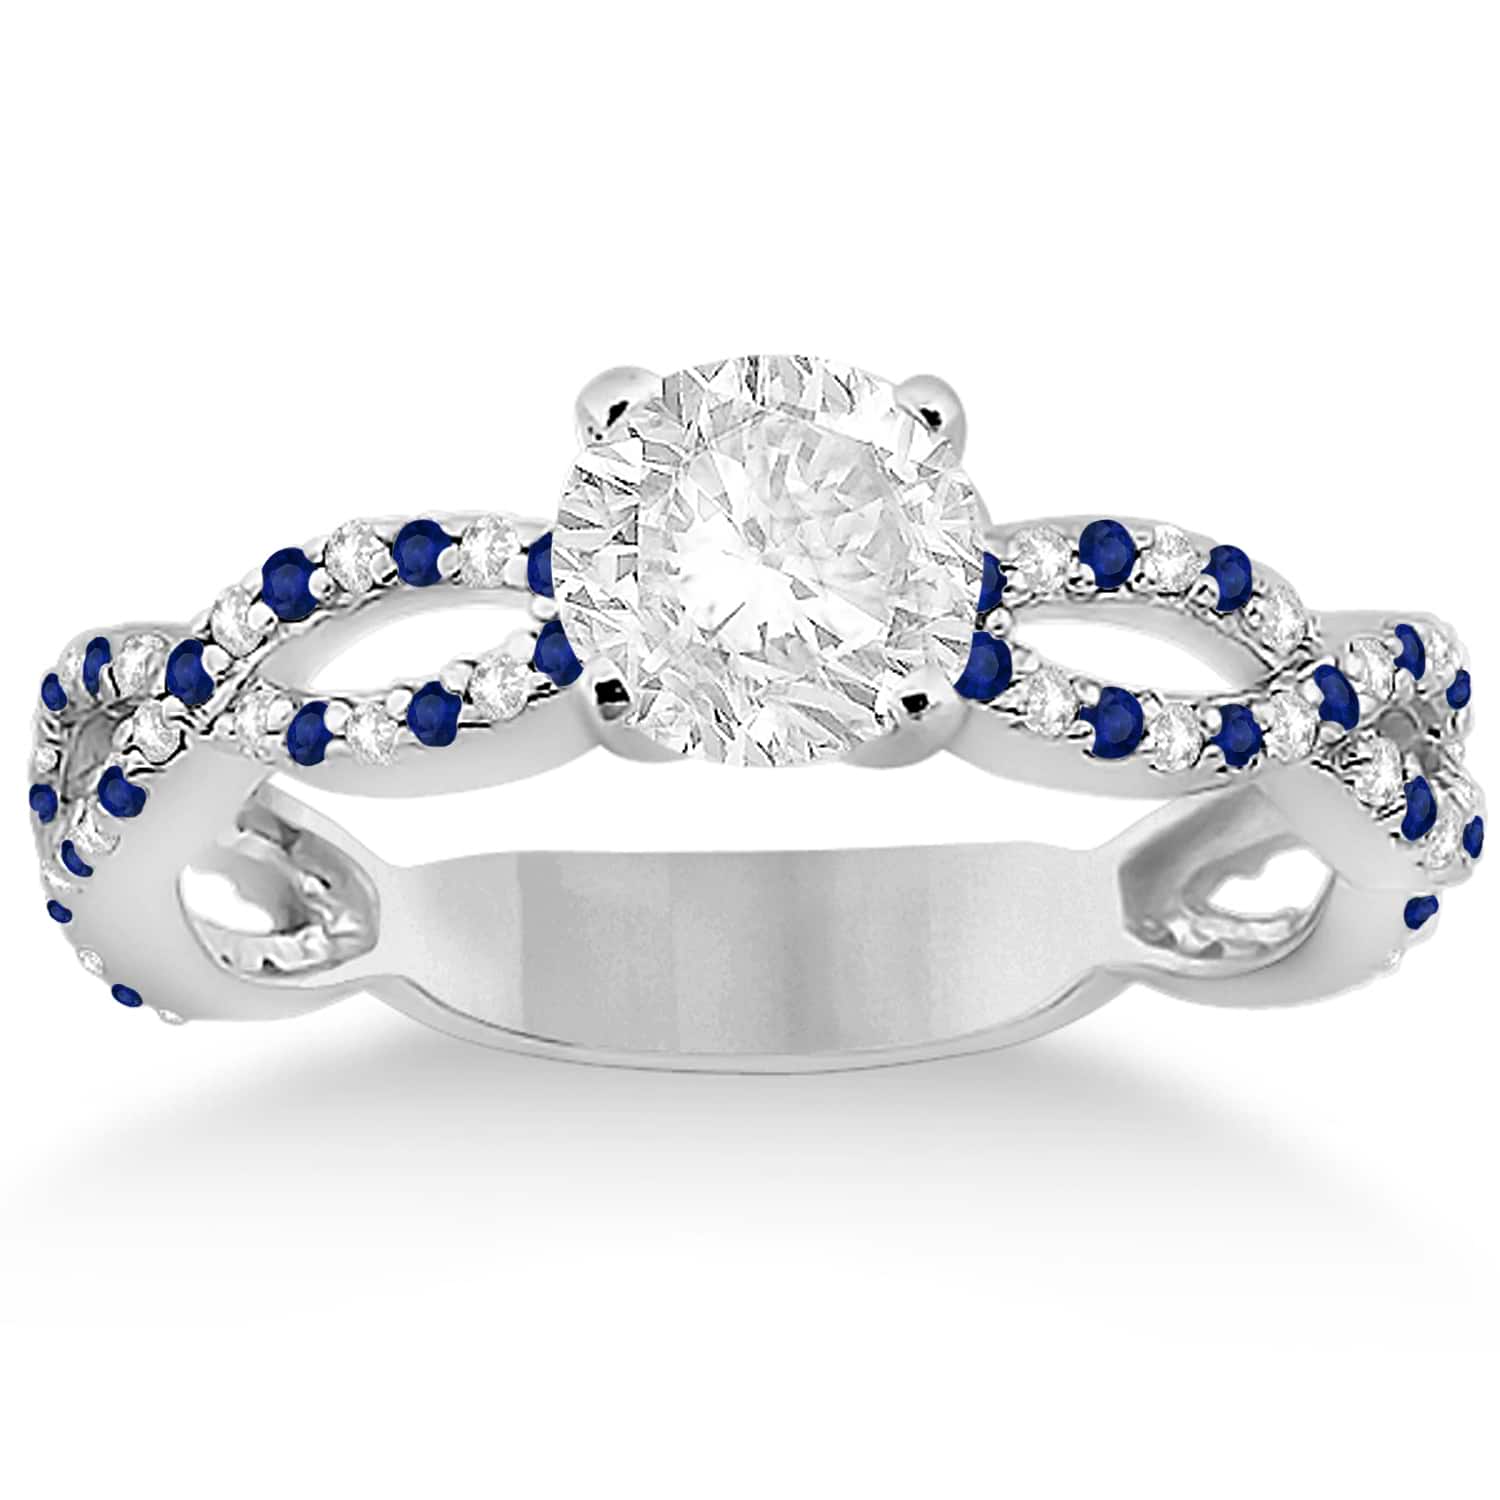 Infinity Diamond & Blue Sapphire Engagement Ring with Band 14k White Gold (0.65ct)